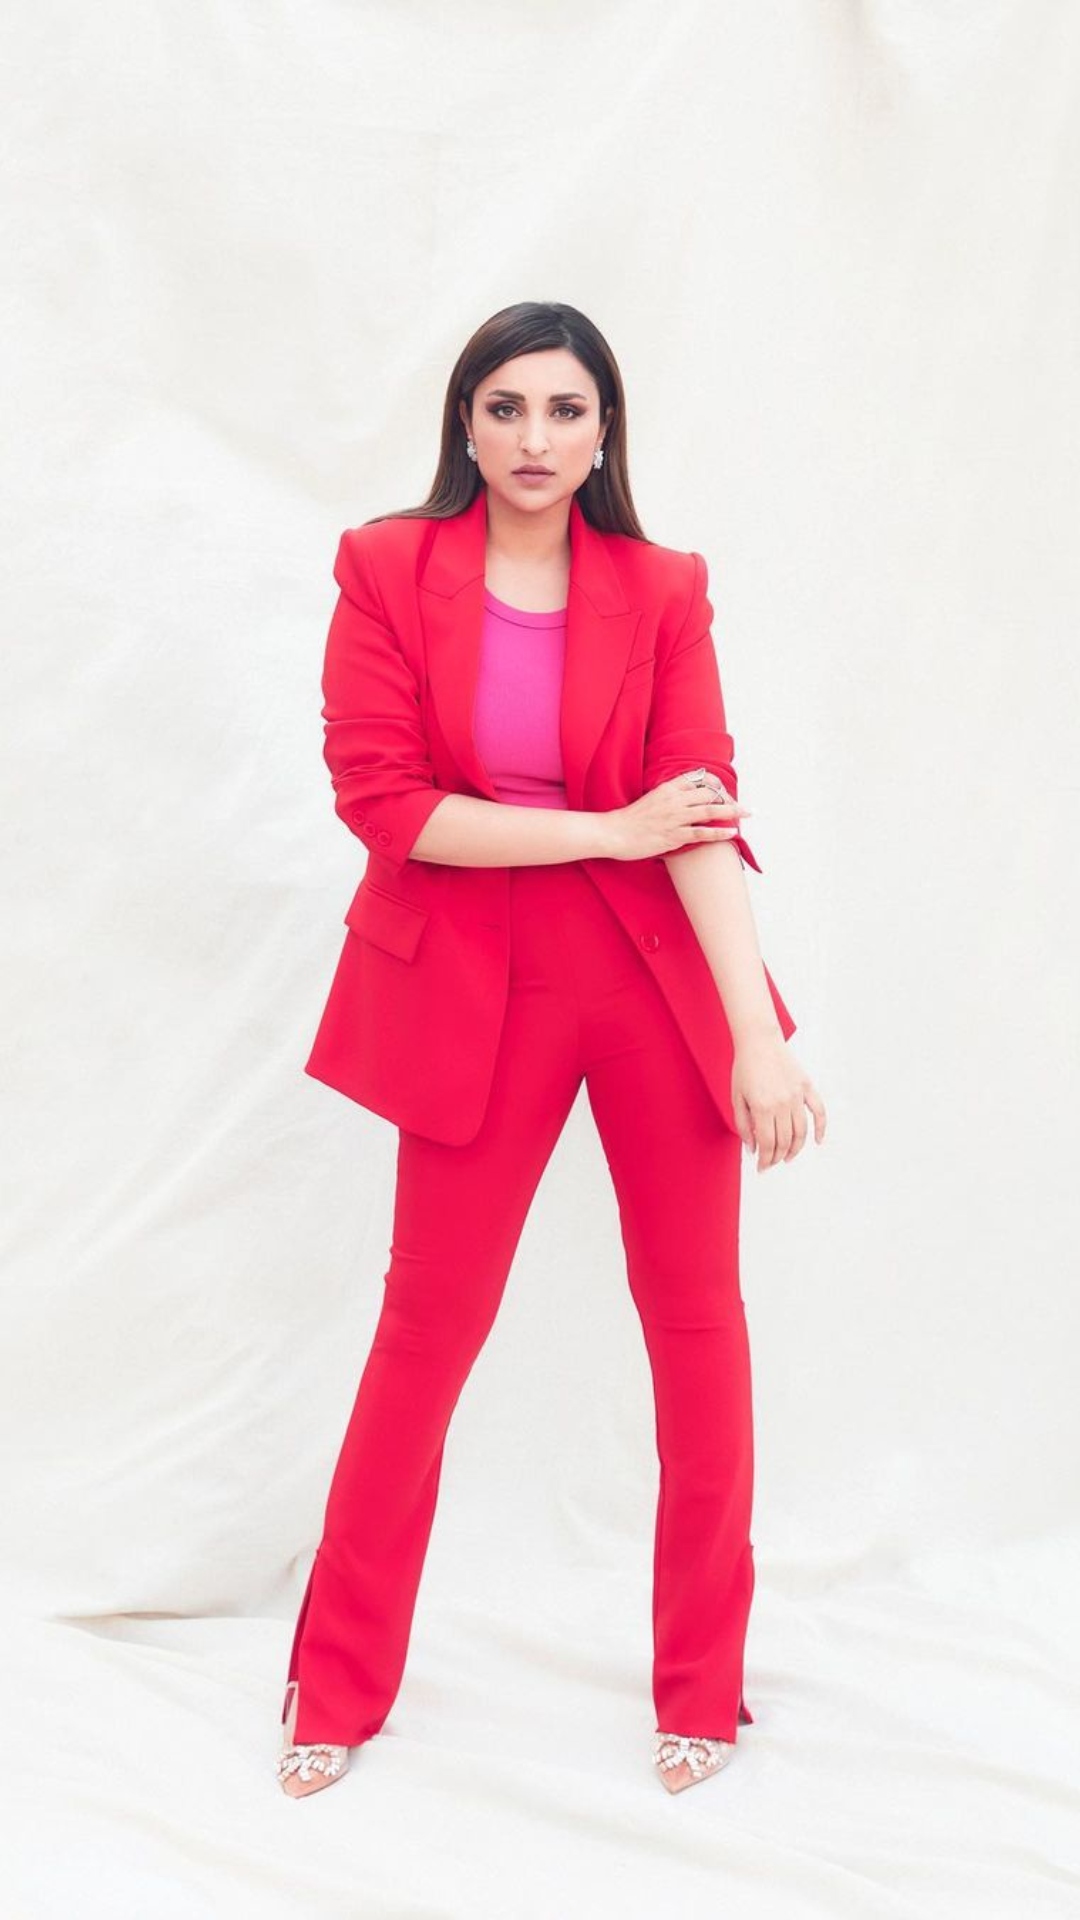 Times when Deepika Padukone rocked power dressing in pant suits!